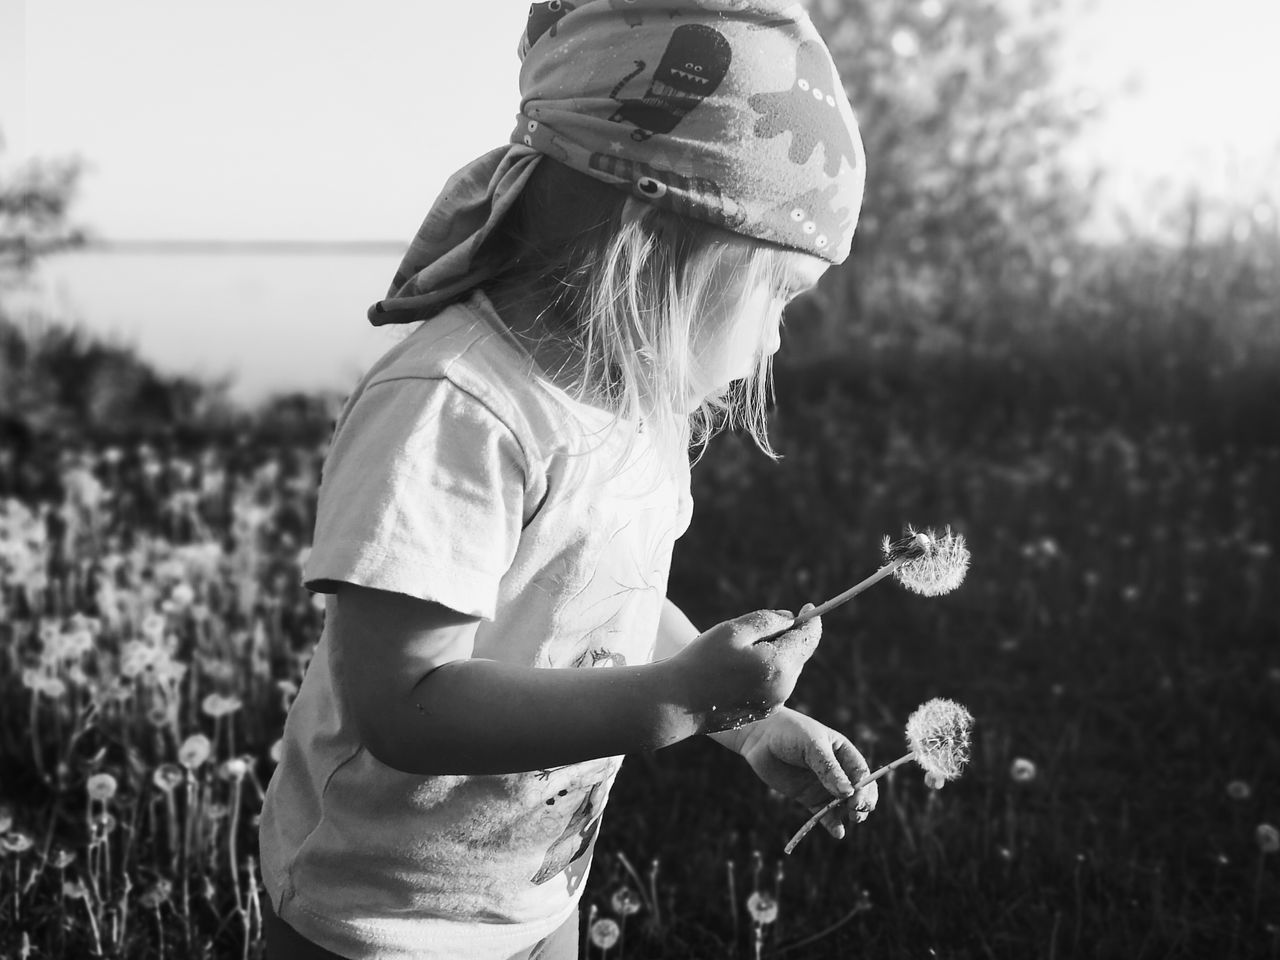 plant, nature, black and white, one person, sky, childhood, black, child, women, field, monochrome photography, white, monochrome, female, land, hat, grass, adult, day, side view, holding, person, casual clothing, leisure activity, spring, outdoors, three quarter length, flower, waist up, growth, clothing, sunlight, summer, flowering plant, rural scene, focus on foreground, fashion accessory, lifestyles, landscape, standing, activity, looking, beauty in nature, agriculture, sun hat, portrait photography